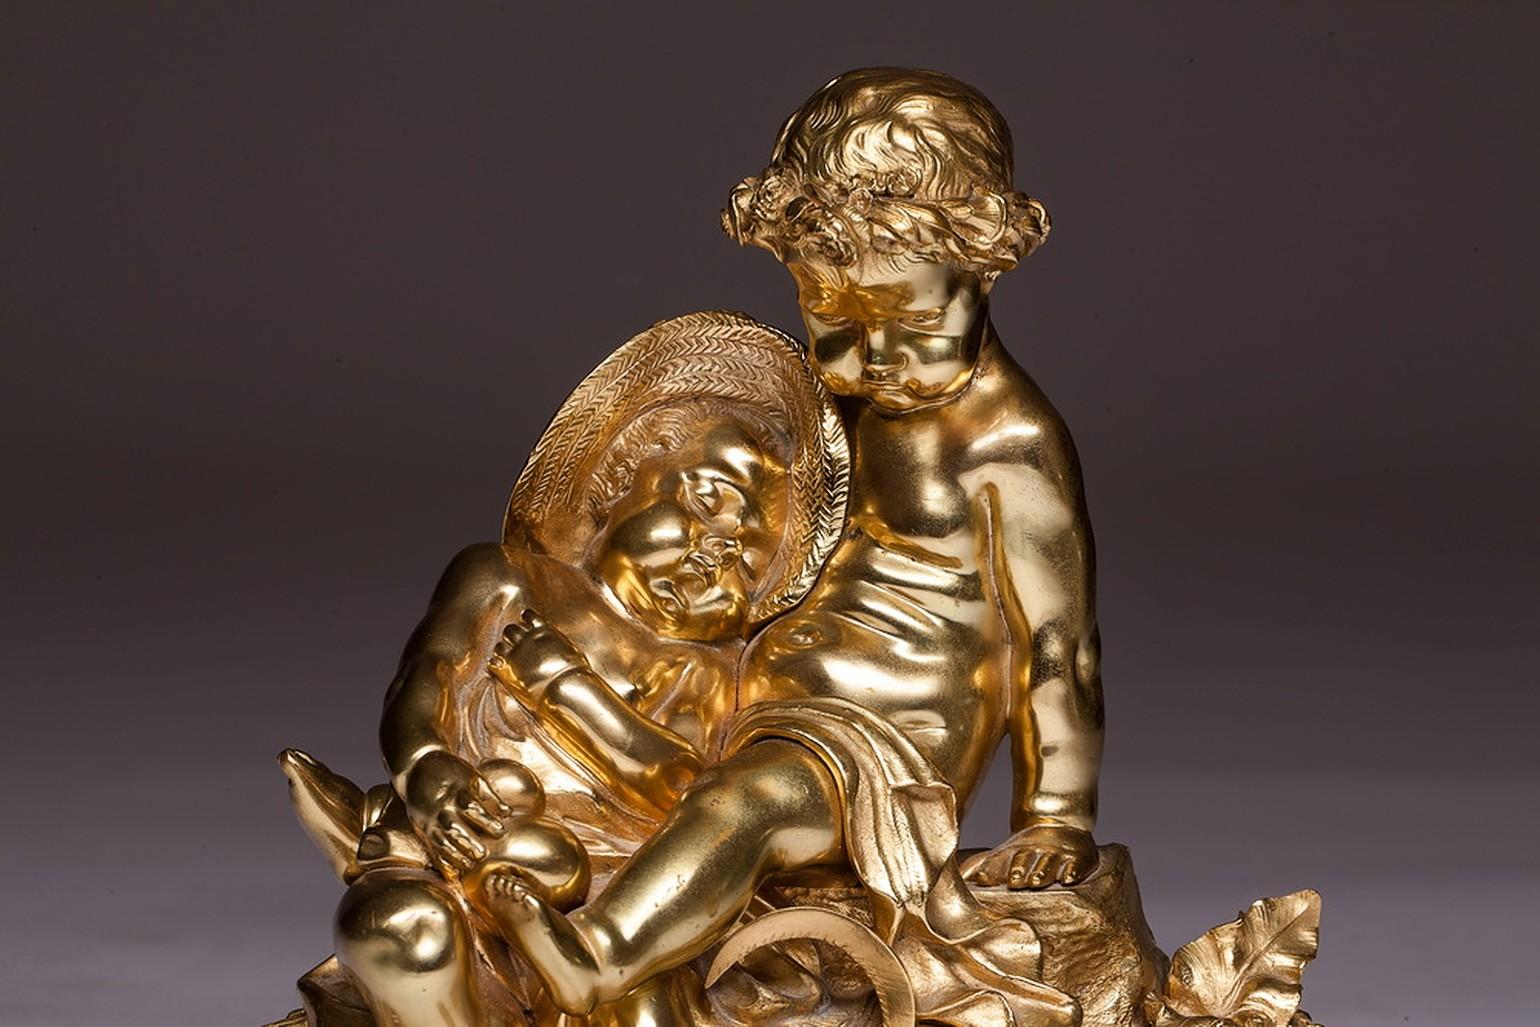 French bronze sculpture with two cherub putti on the marble base 19th century. French figure from the late 19th century. One cherub is sitting and holding other baby with a hat. They are on the small wheat hill. This bronze statue is standing on the